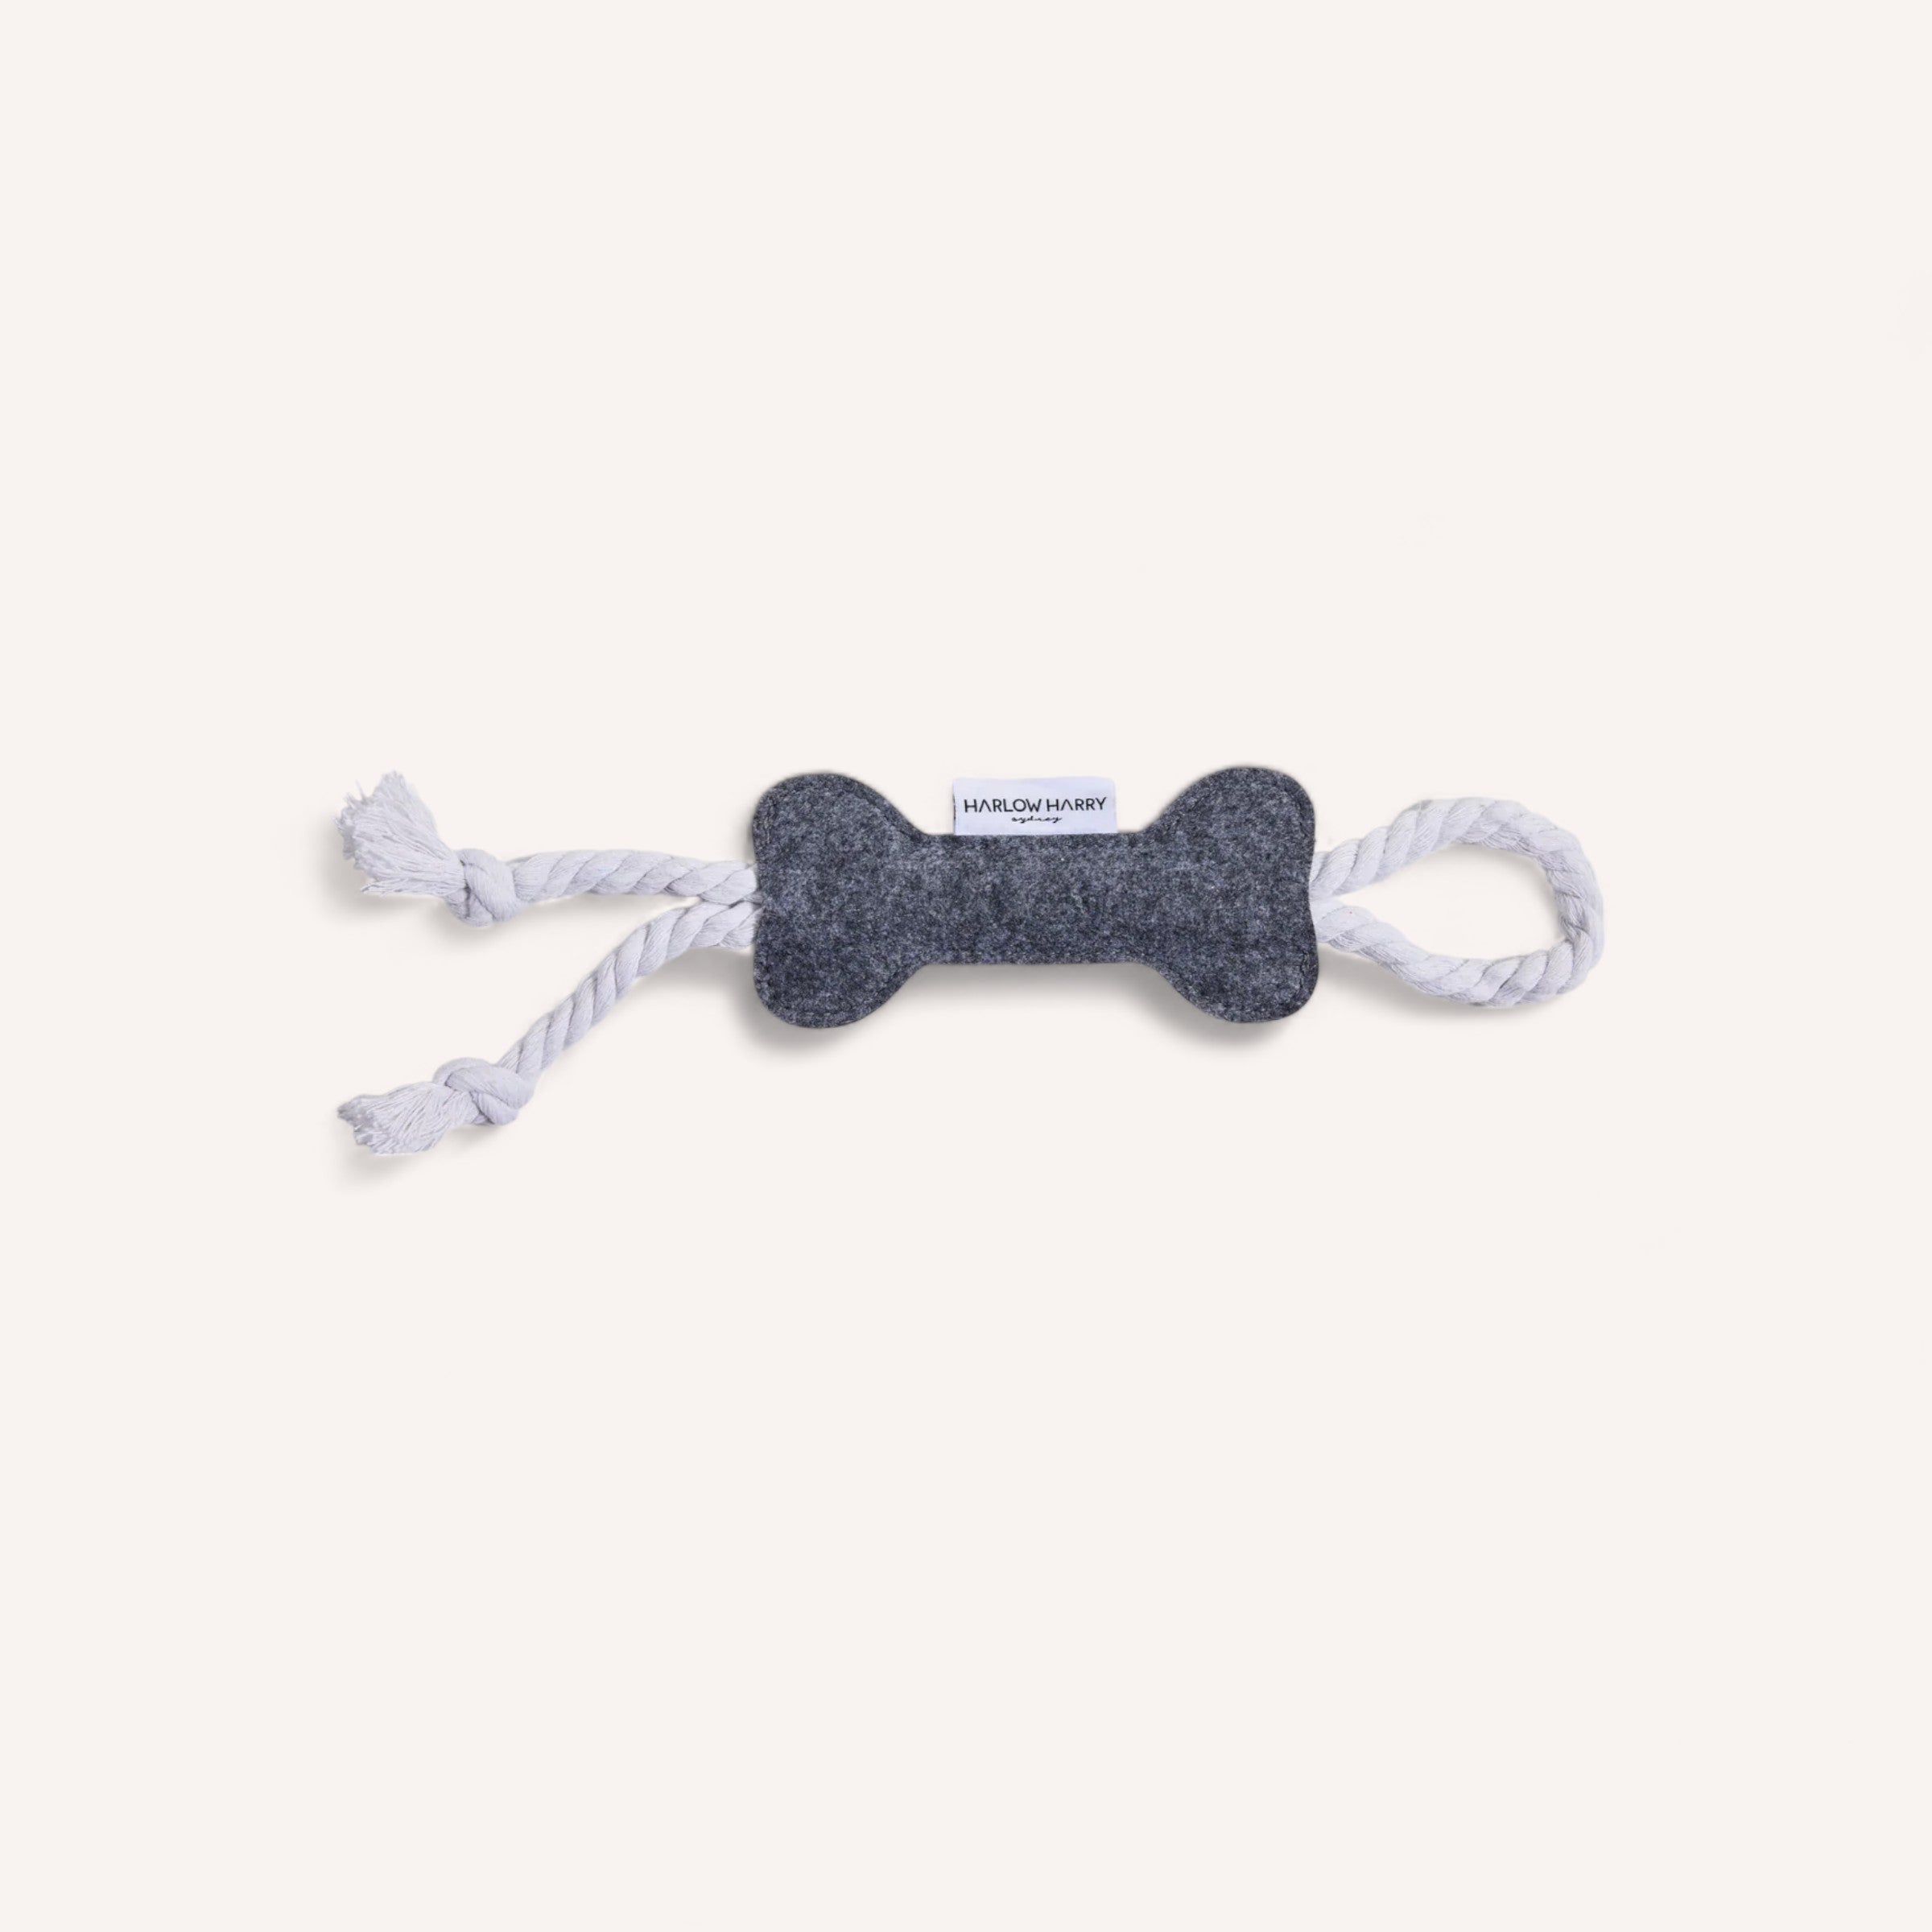 A Rope Felt Bone Toy by Harlow Harry with white rope detail ends on a white background, Product of Australia.